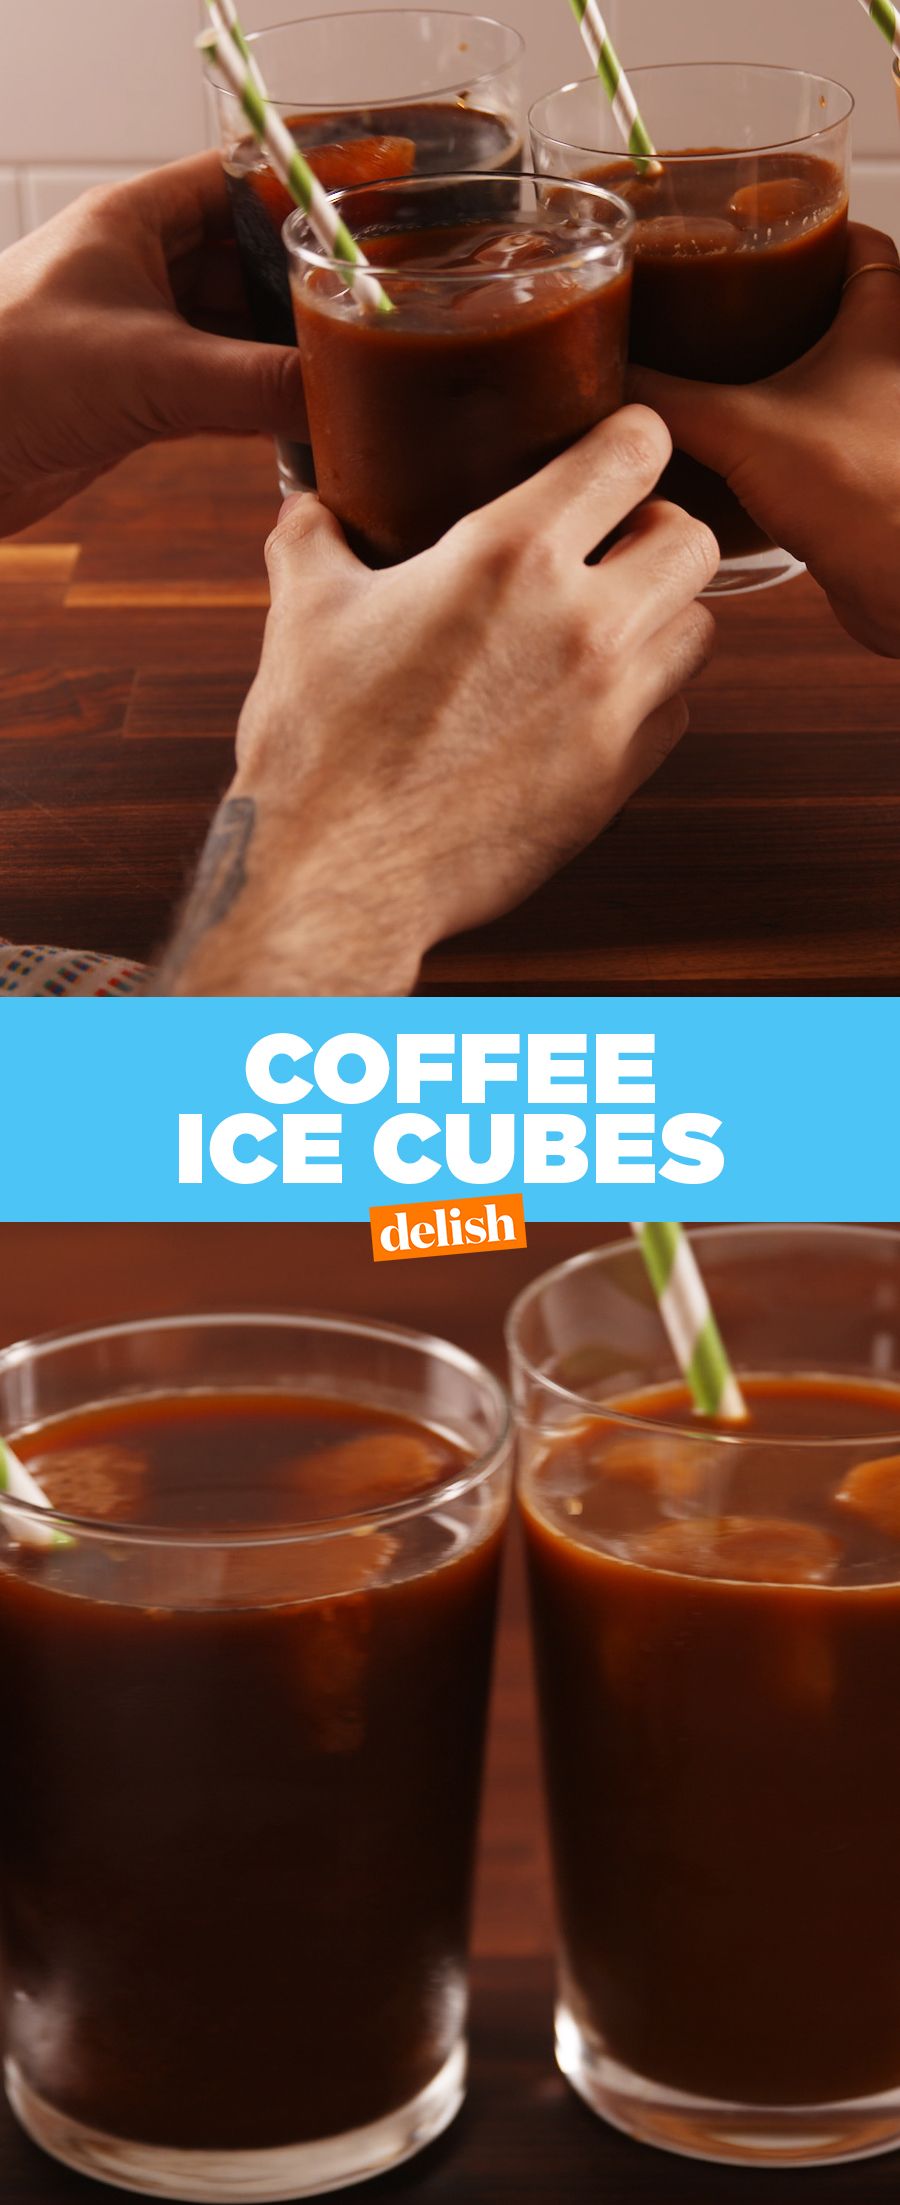 https://hips.hearstapps.com/delish/assets/17/22/1496428150-delish-coffee-ice-cubes-pin.jpg